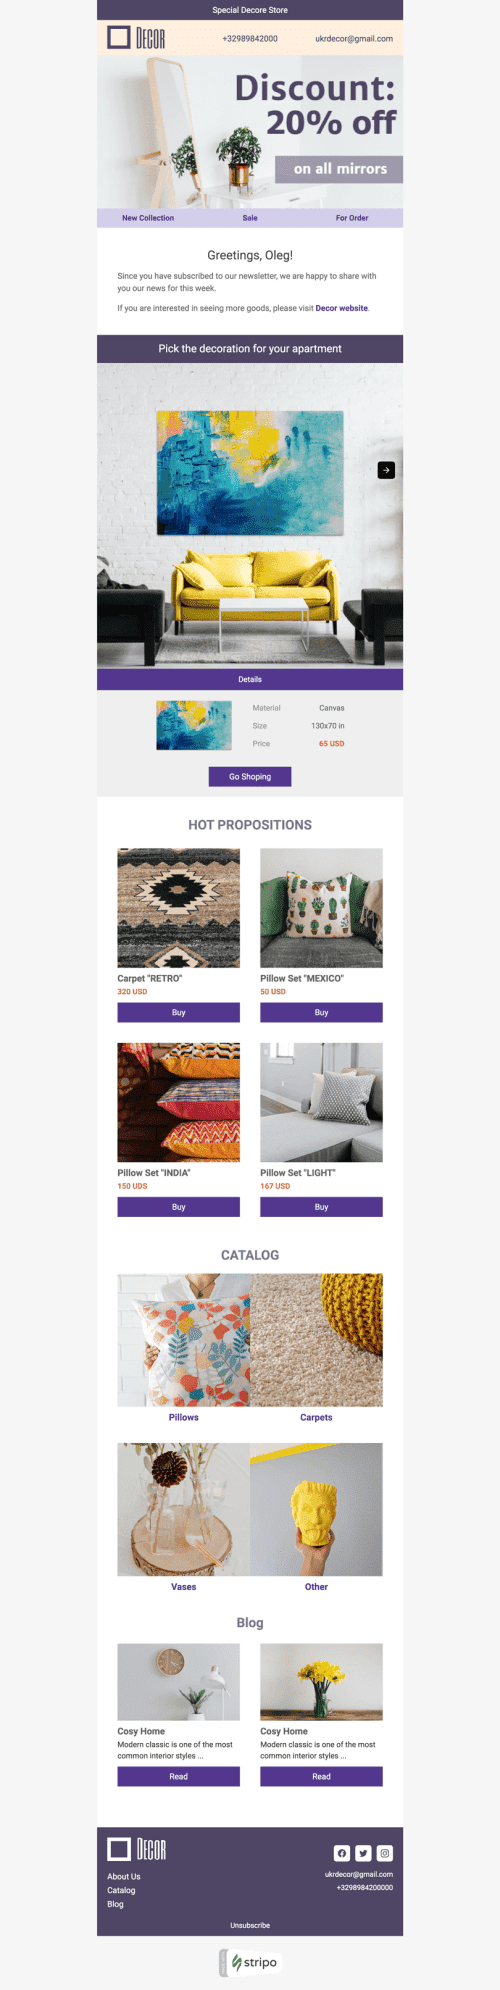 Promo Email Template «Time for a change» for Furniture, Interior & DIY industry desktop view